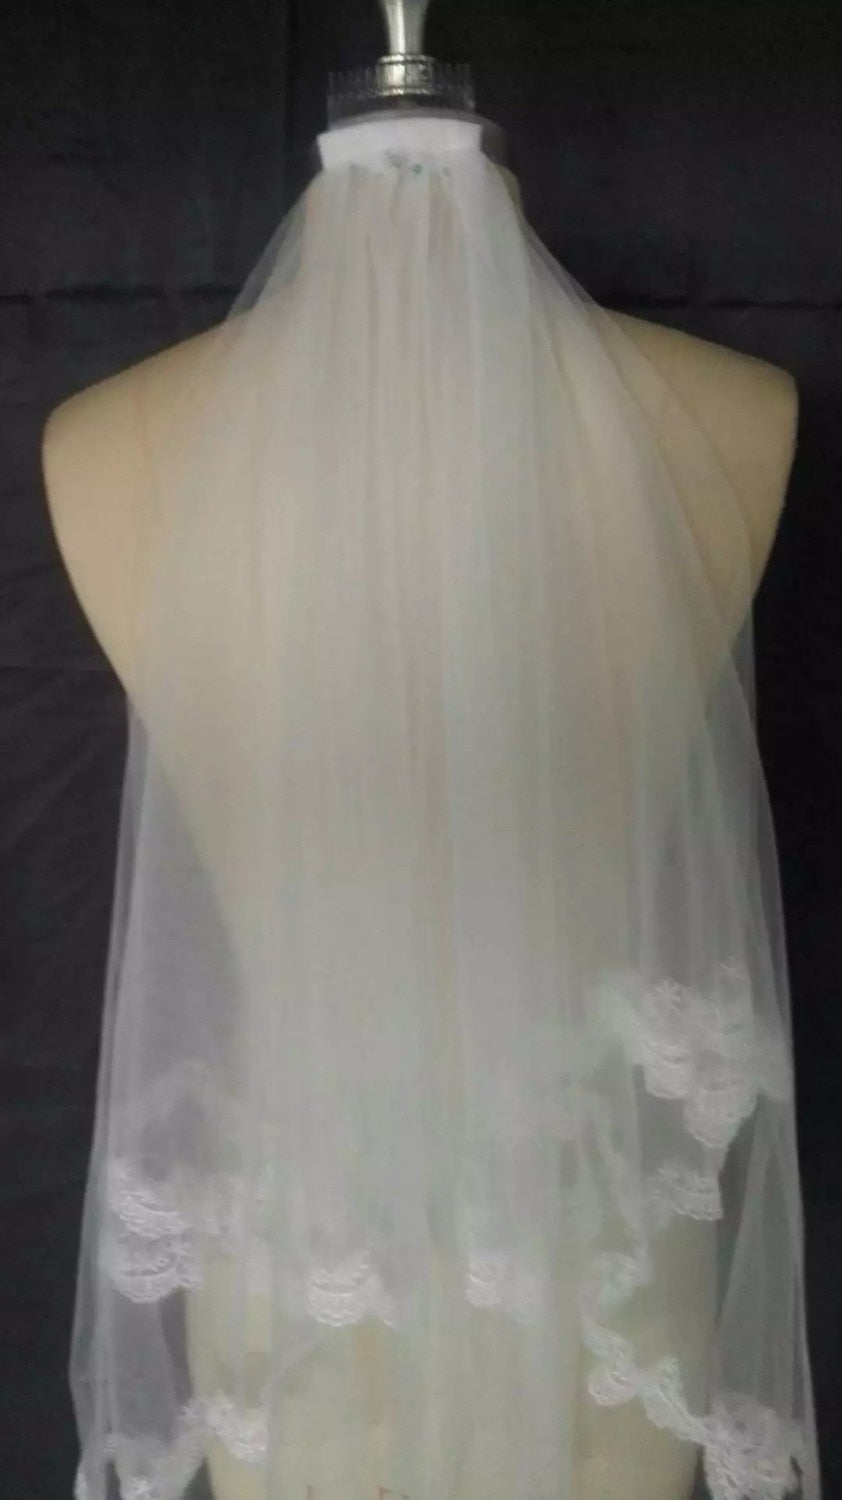 Lace Edge In Stock White Ivory Short Bridal Veil with Comb Applique Edge Wedding Veil Accessory